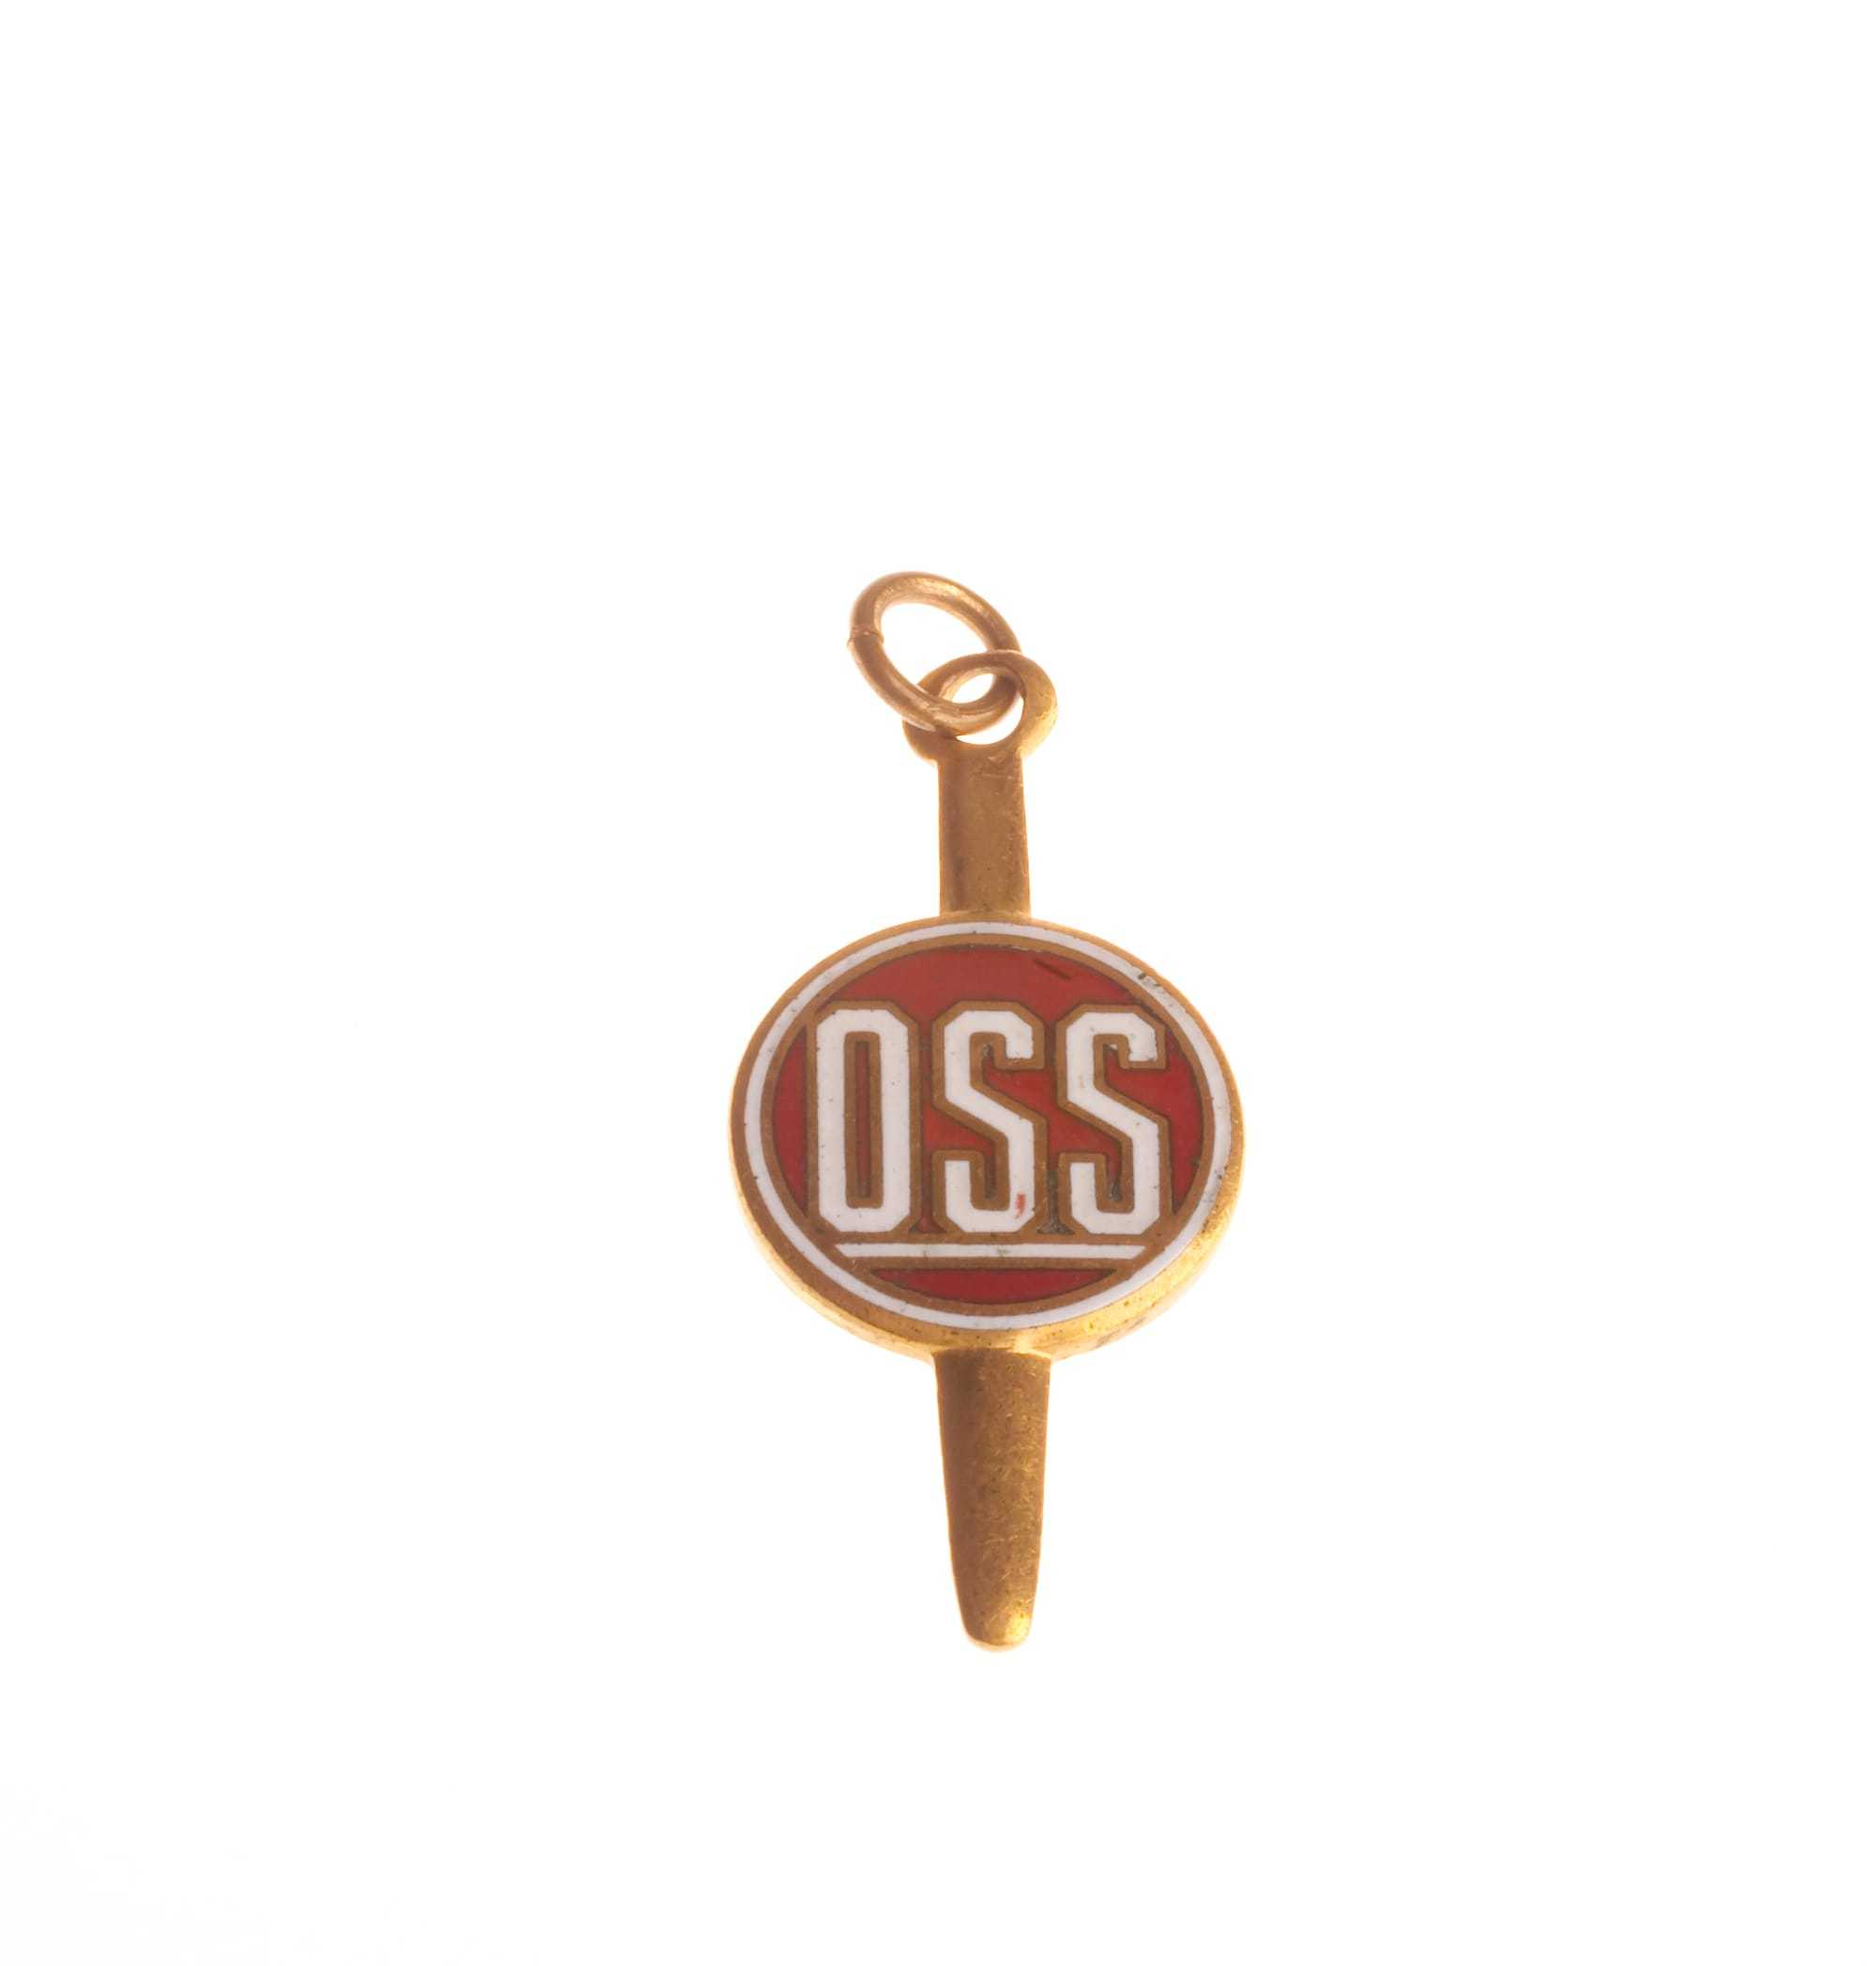 A gold pin with OSS written on a red circle in the middle